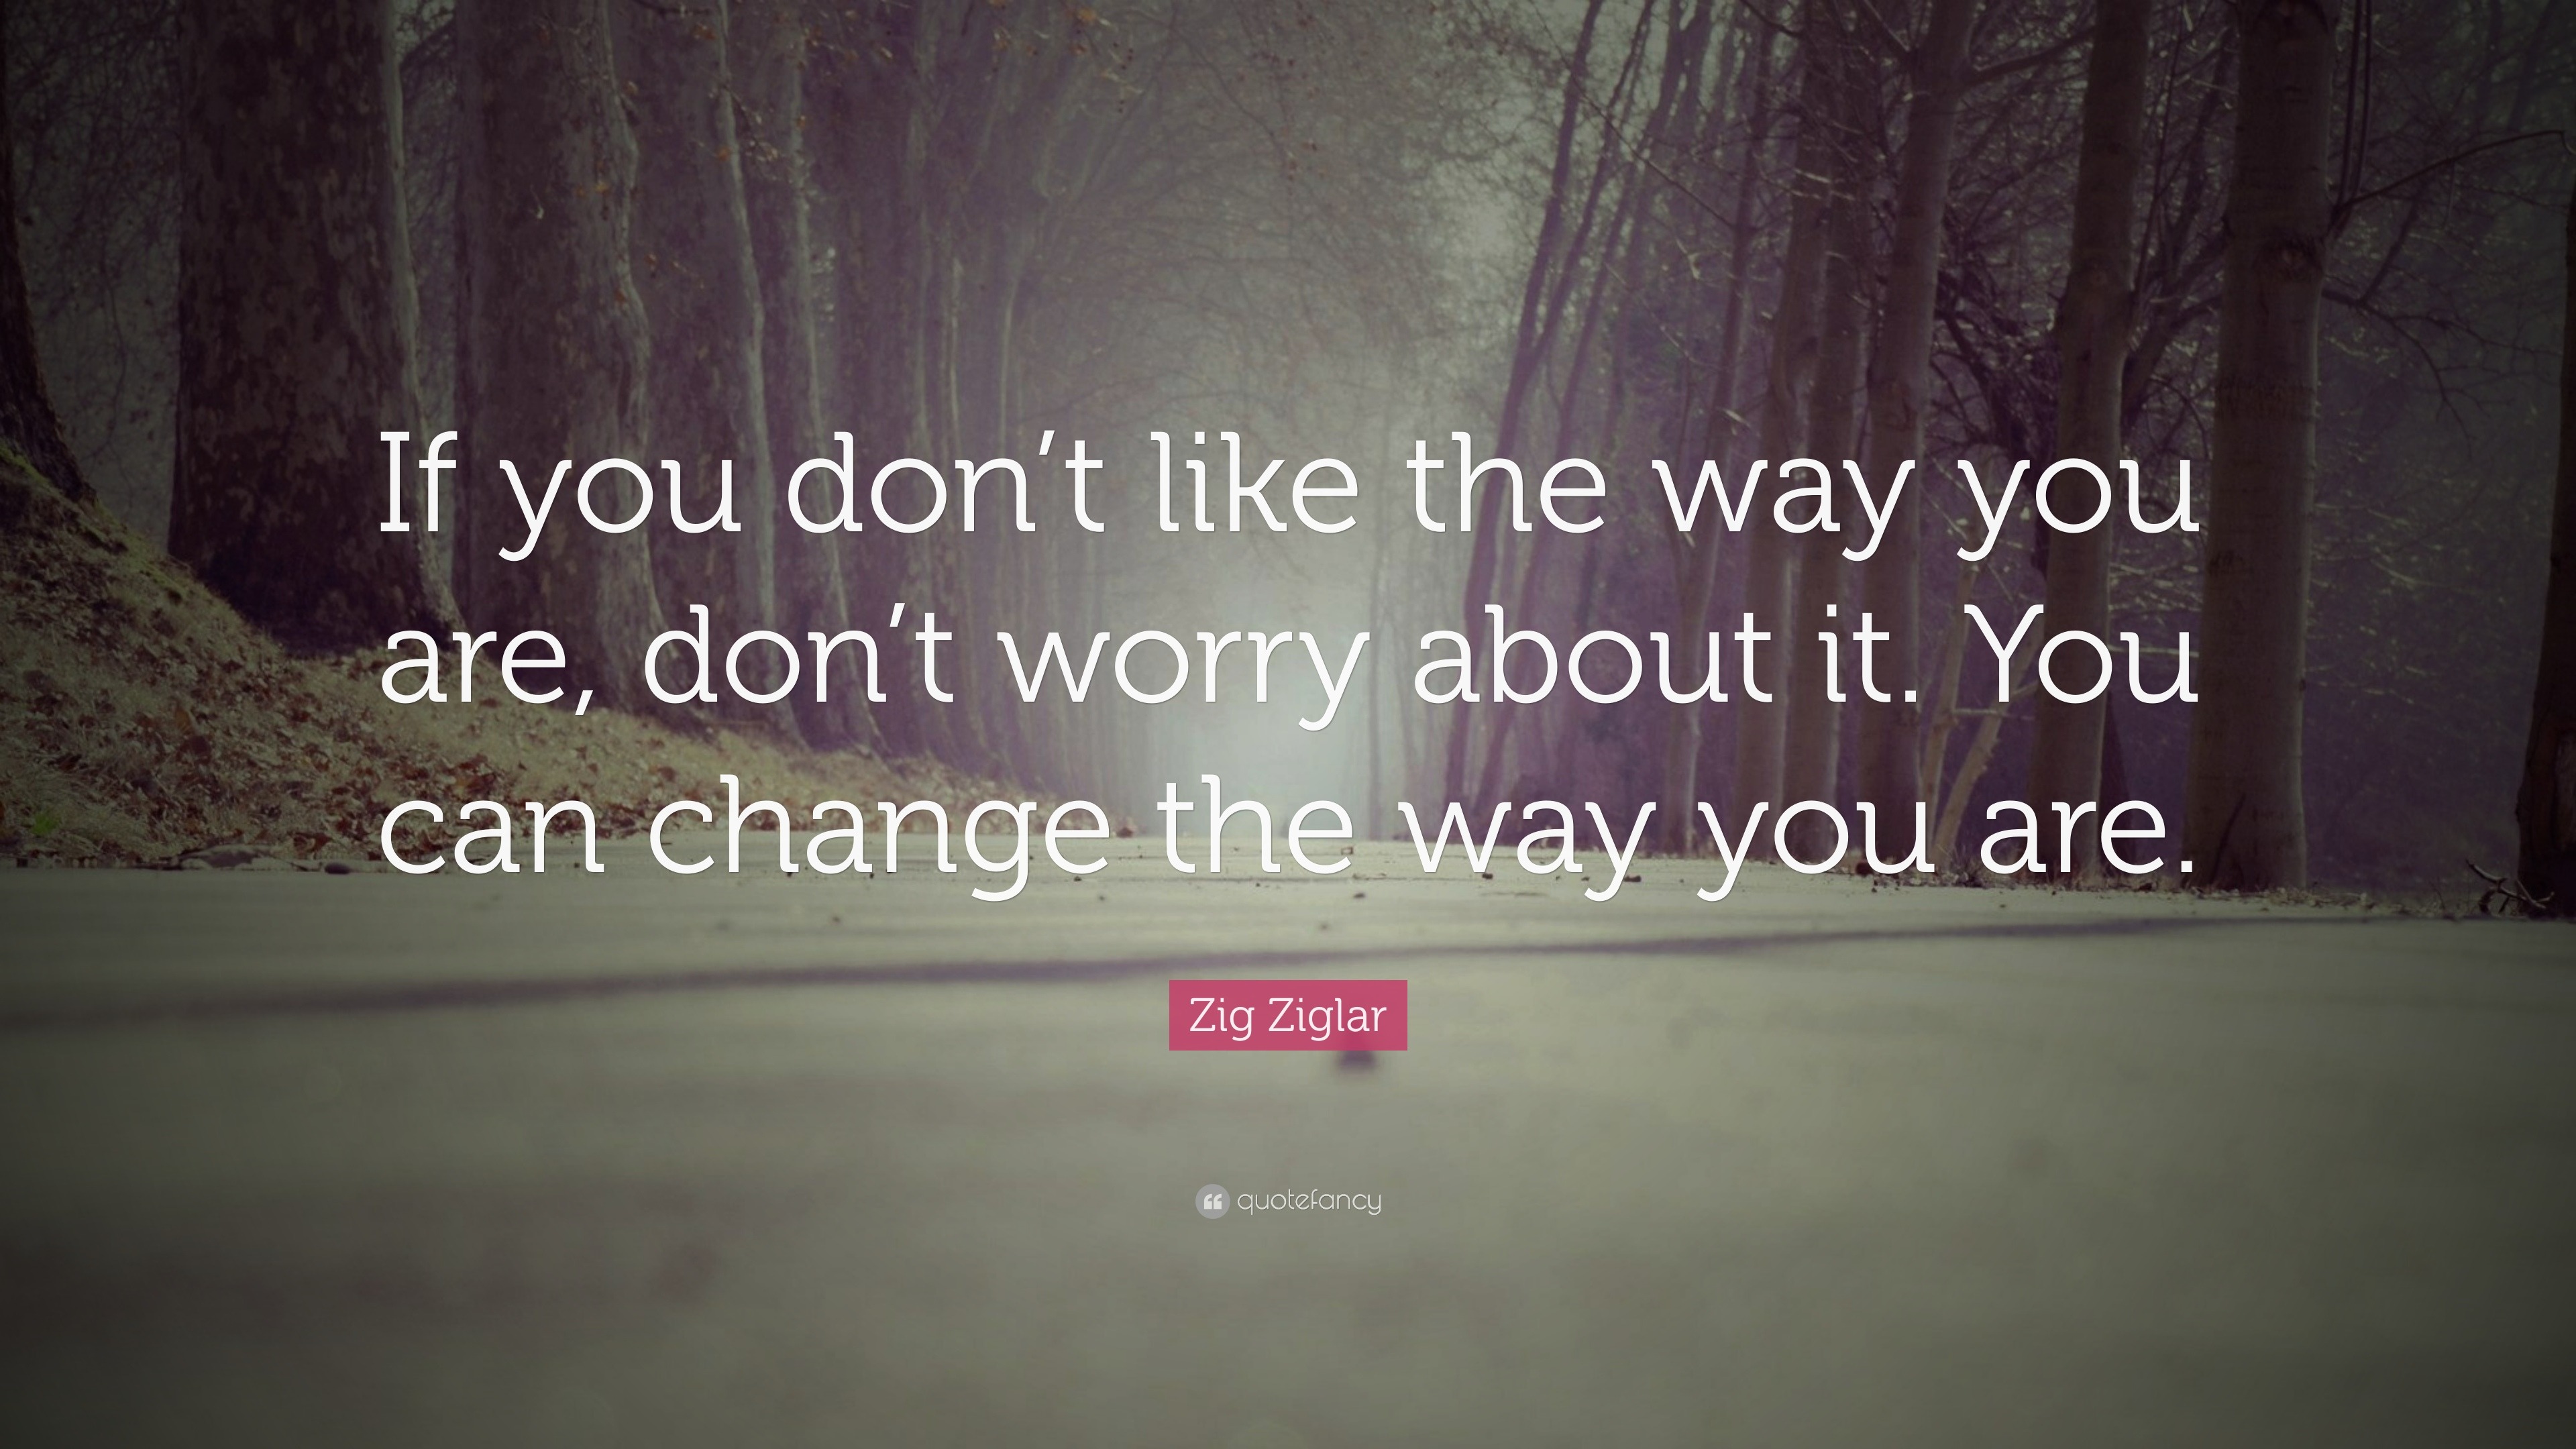 If you donâ€™t like the way you are, donâ€™t worry about it. 